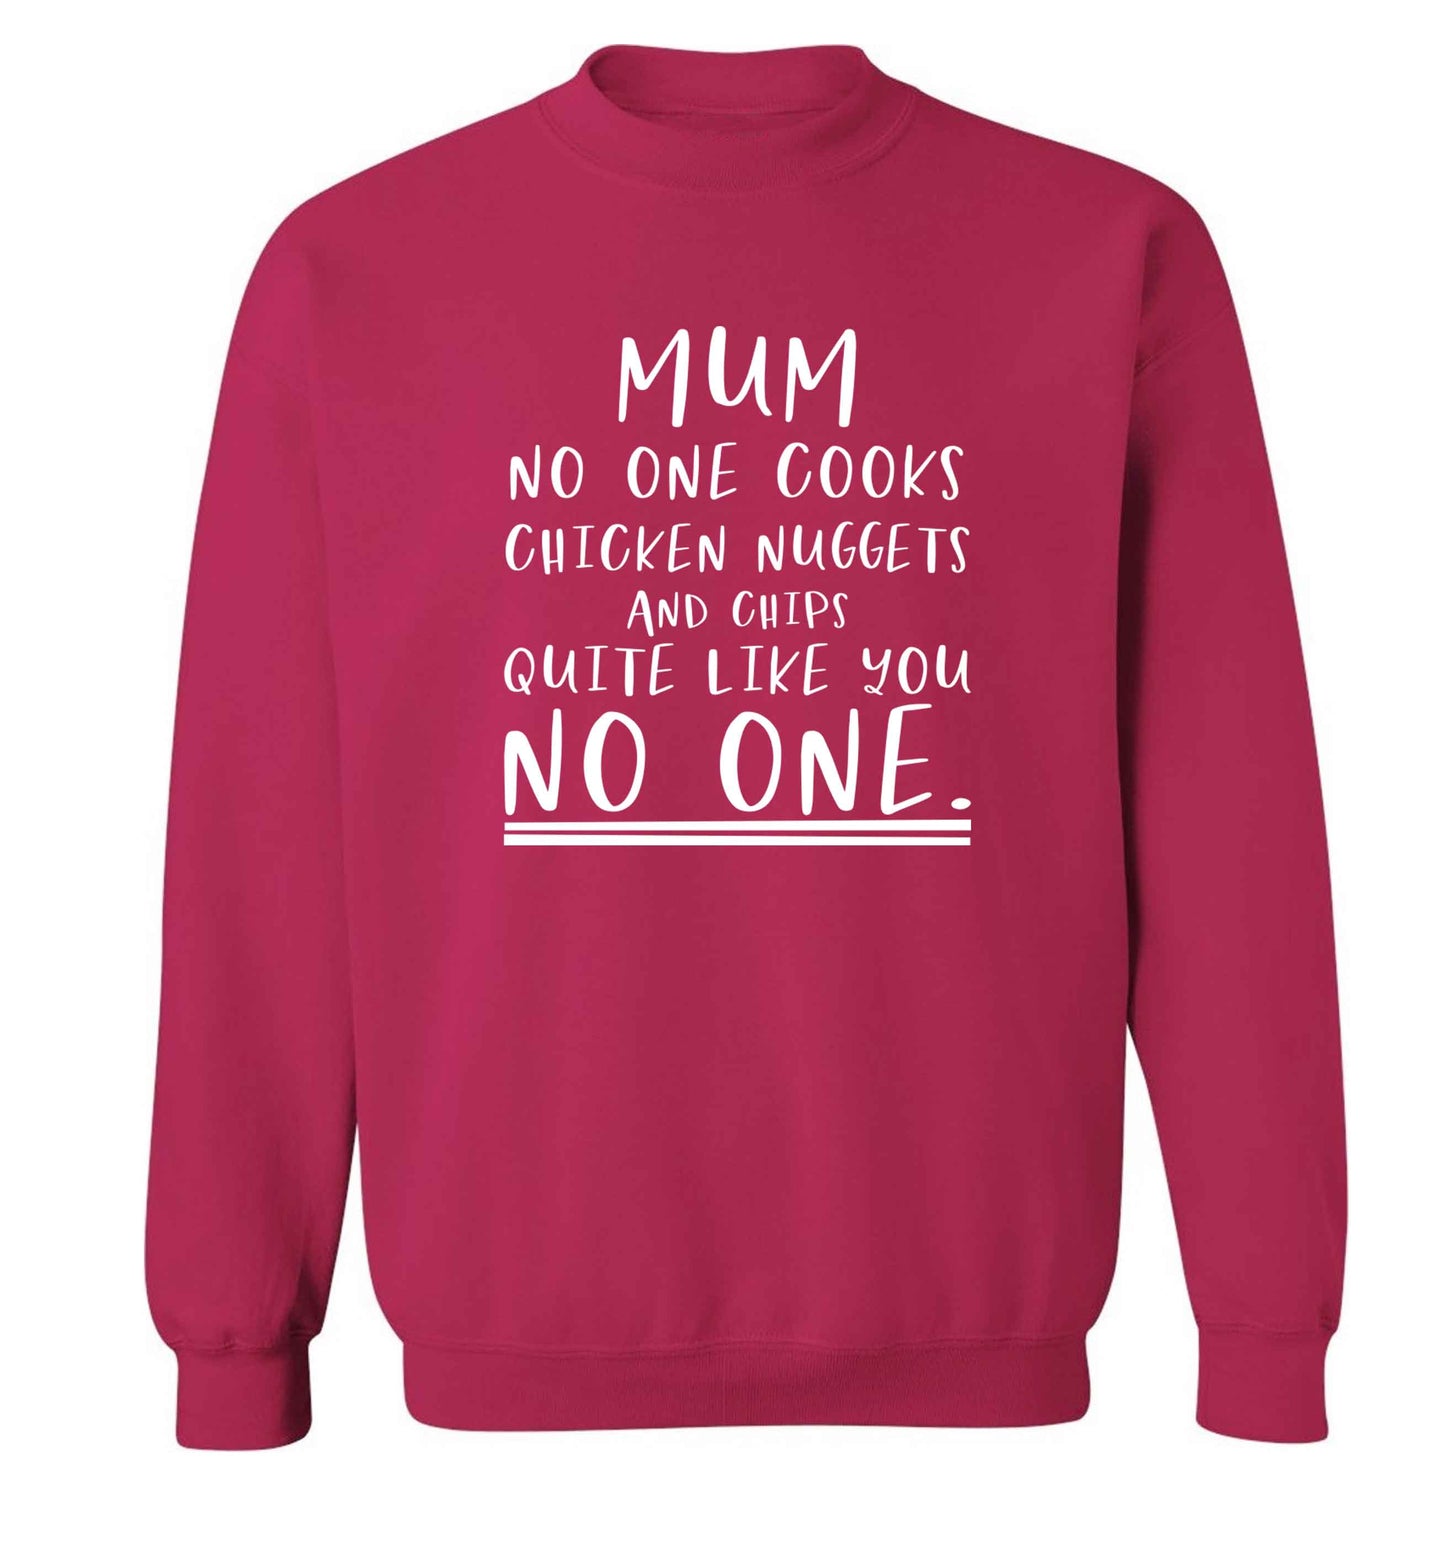 Super funny sassy gift for mother's day or birthday!  Mum no one cooks chicken nuggets and chips like you no one adult's unisex pink sweater 2XL